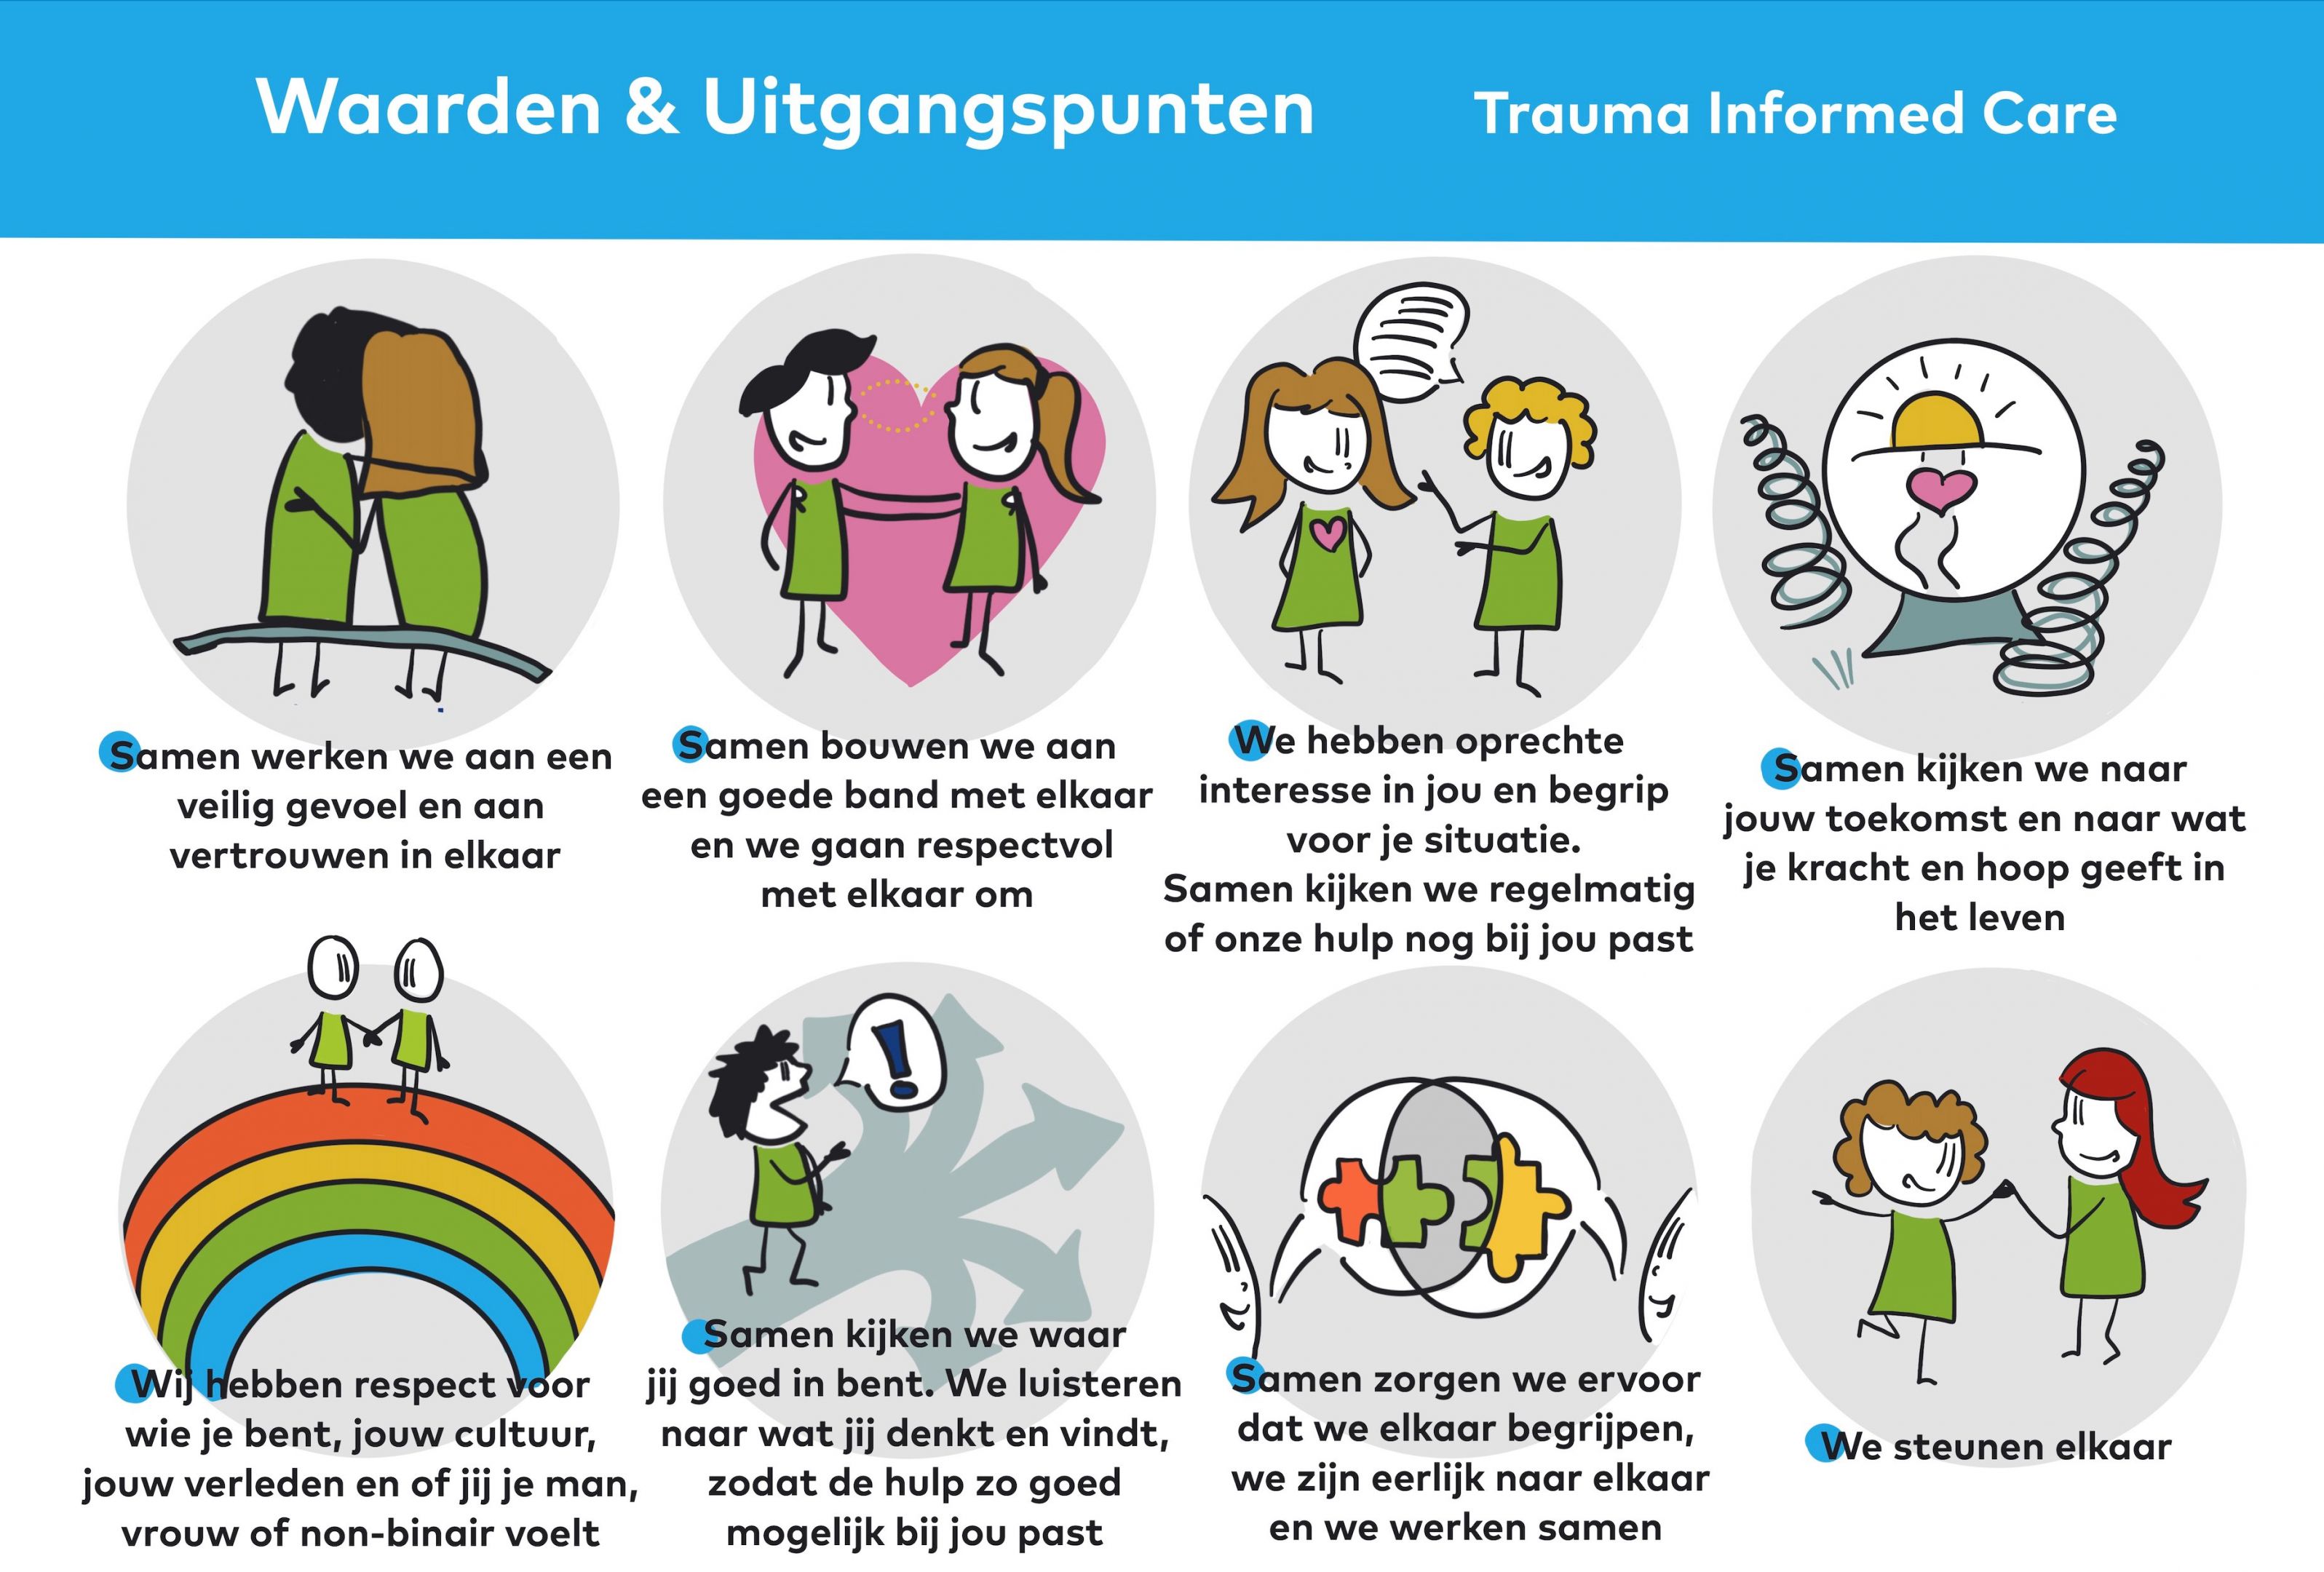 Figuur 3. Waarden en uitgangspunten van trauma-informed care (SAMHSA, 2014; Treisman, 2021). Illustratie: vrij naar SAMHSA’s Concept of Trauma and Guidance for a Trauma-Informed Approach (SAMHSA, 2014) en naar A Treasure Box for Creating Trauma-informed Organizations: A Ready-to-use Resource for Trauma, Adversity, and Culturally Informed, Infused and Responsive Systems (Treisman, 2021).